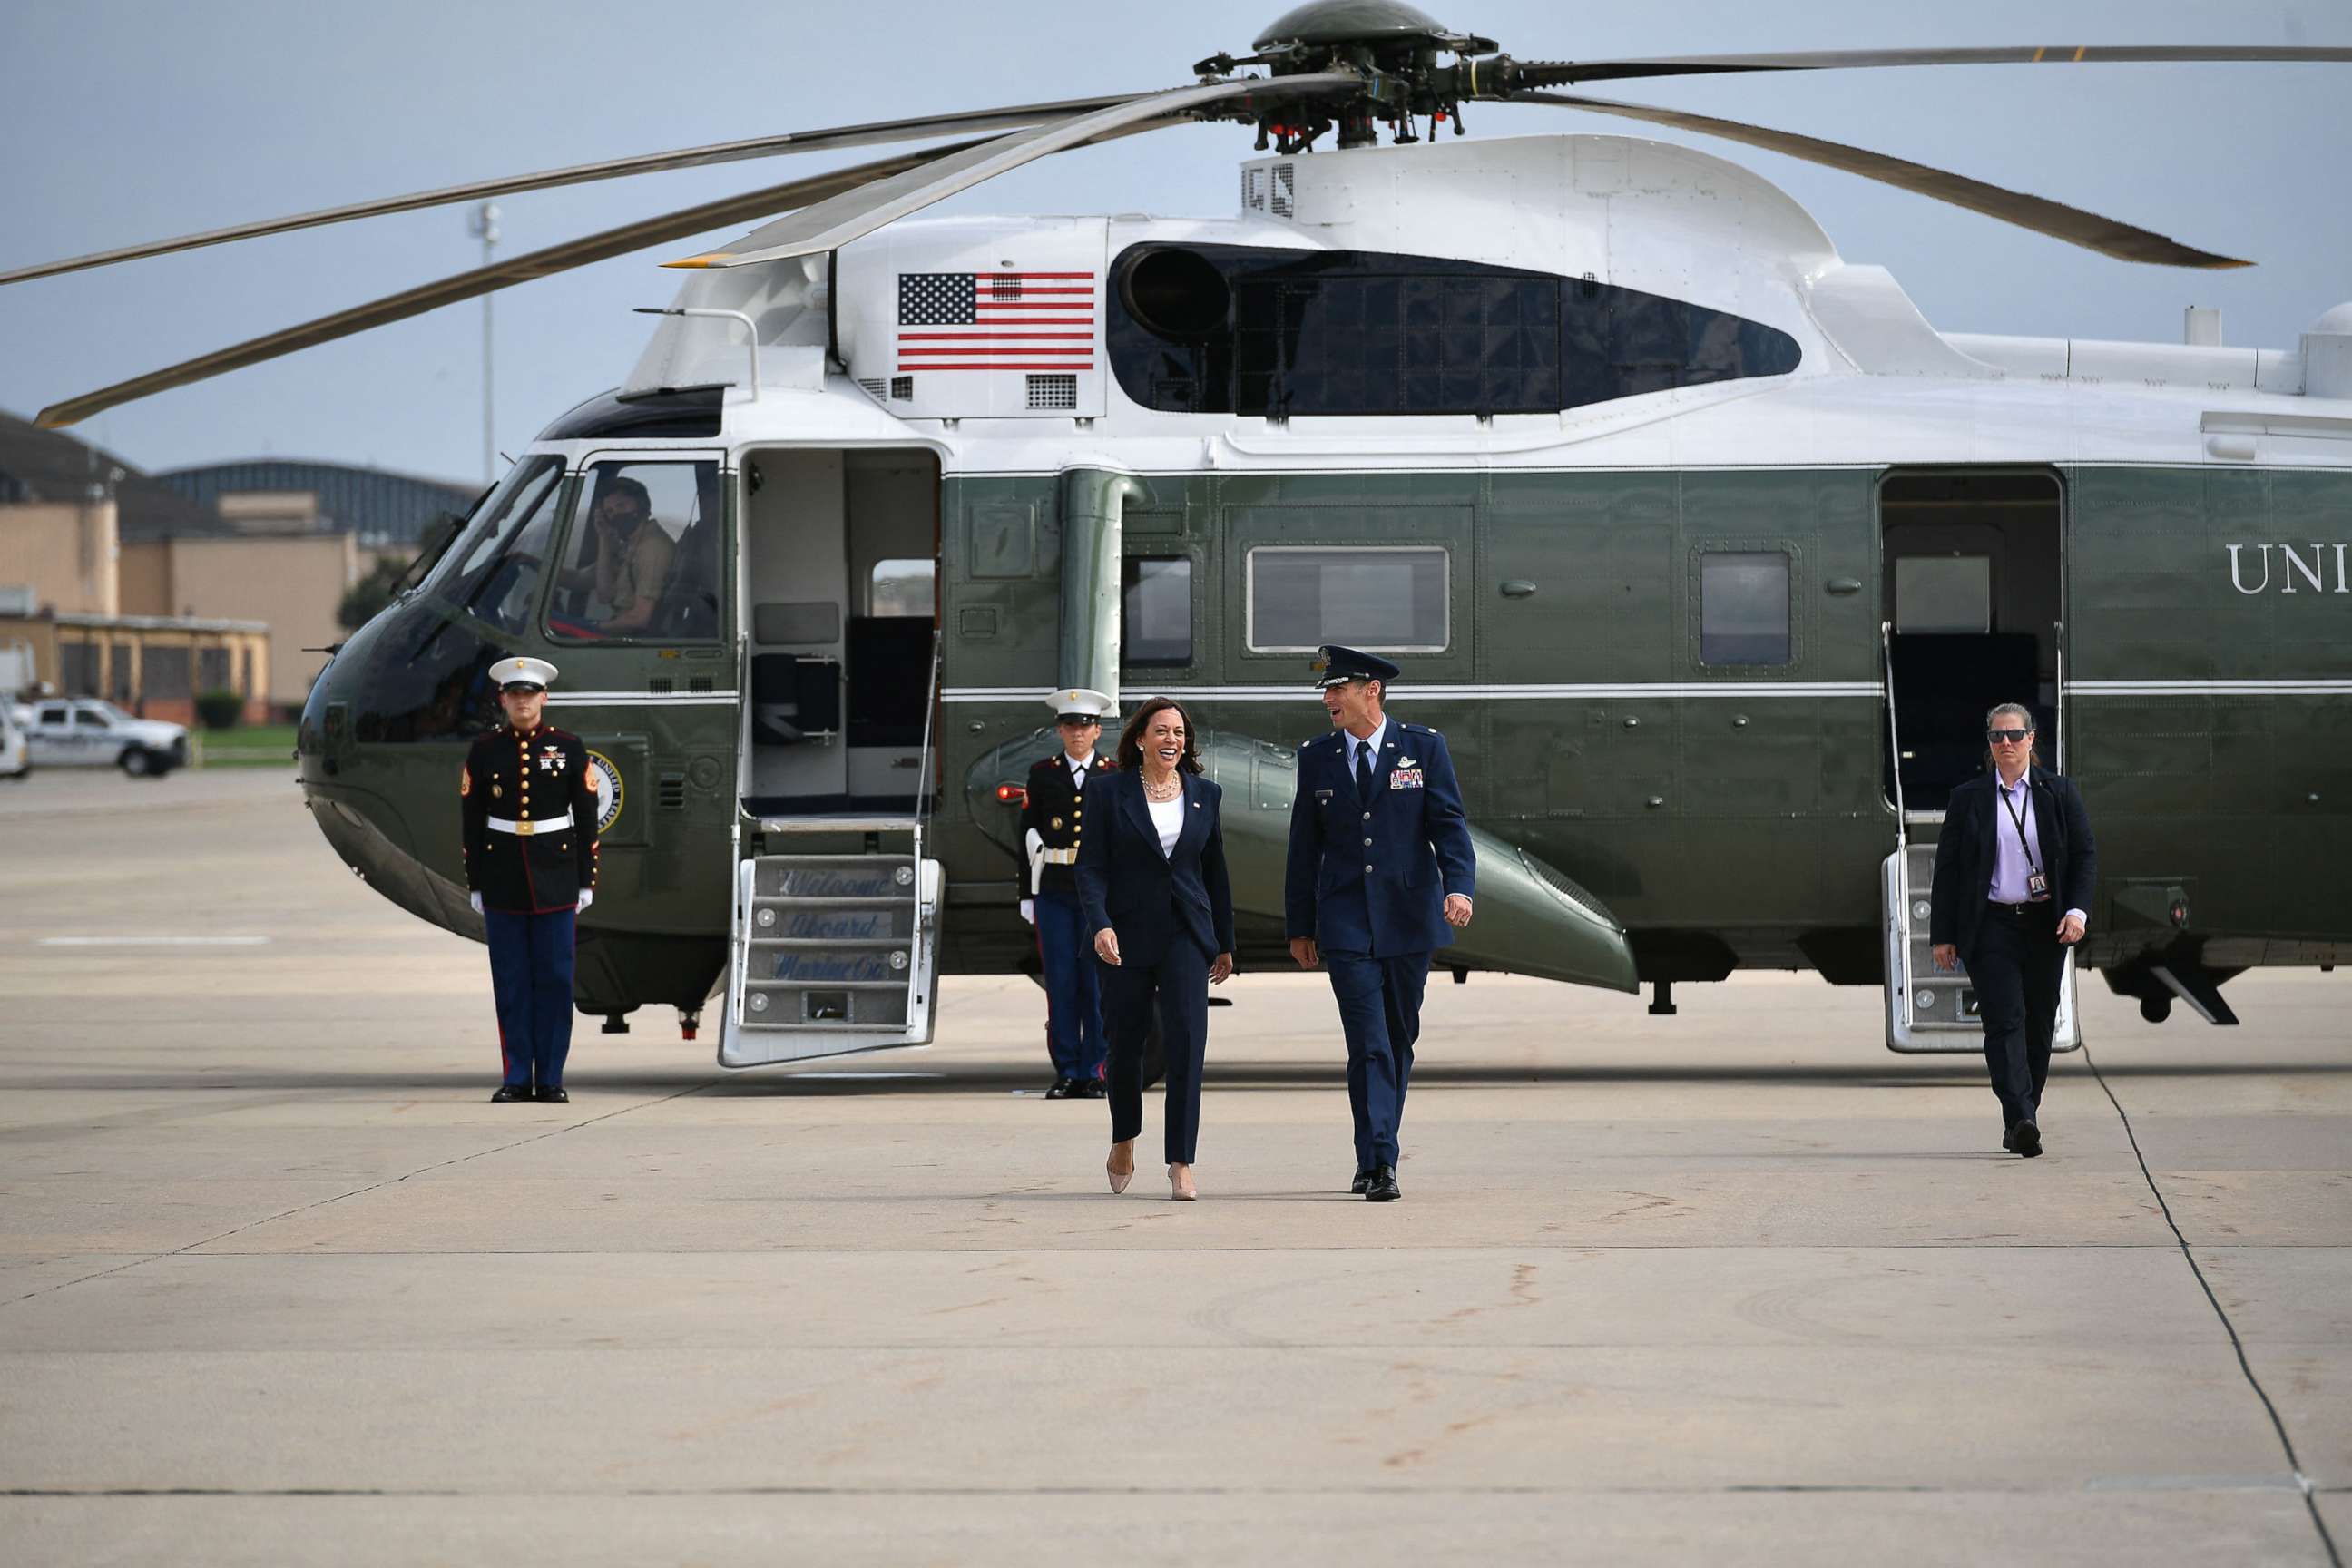 PHOTO: Vice President Kamala Harris makes her way to board a plane before departing from Andrews Air Force Base in Maryland on June 14, 2021. Harris is traveling to Greenville, South Carolina to kick off a national vaccination tour.